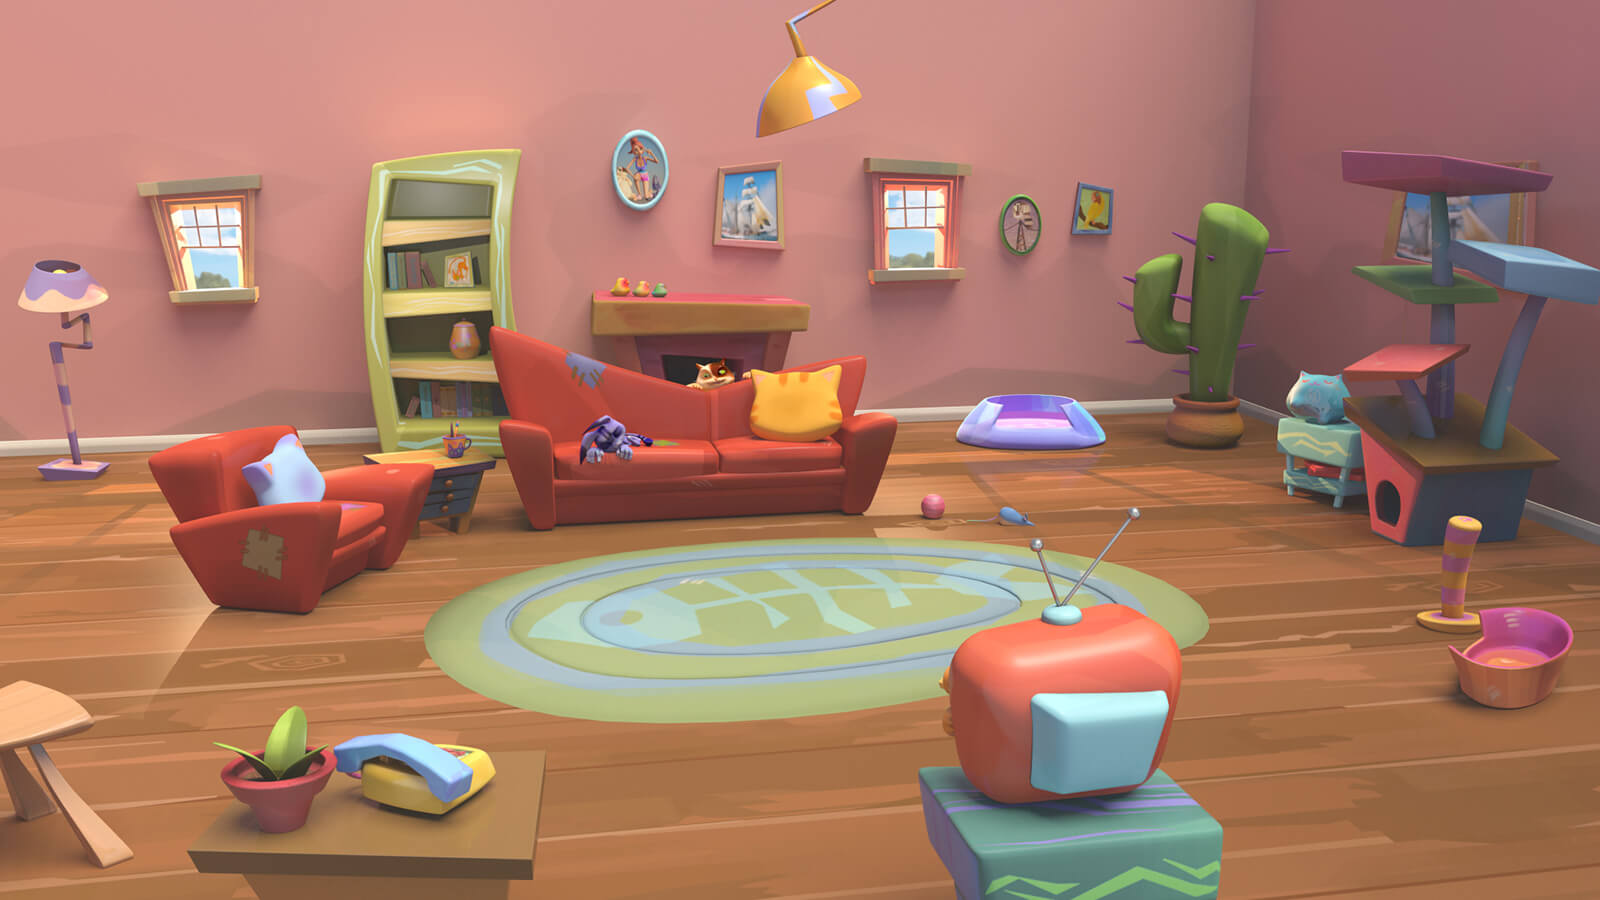 A colorful, stylized CG living room scene, with couches, shelves, a rug, television set, and cat furniture